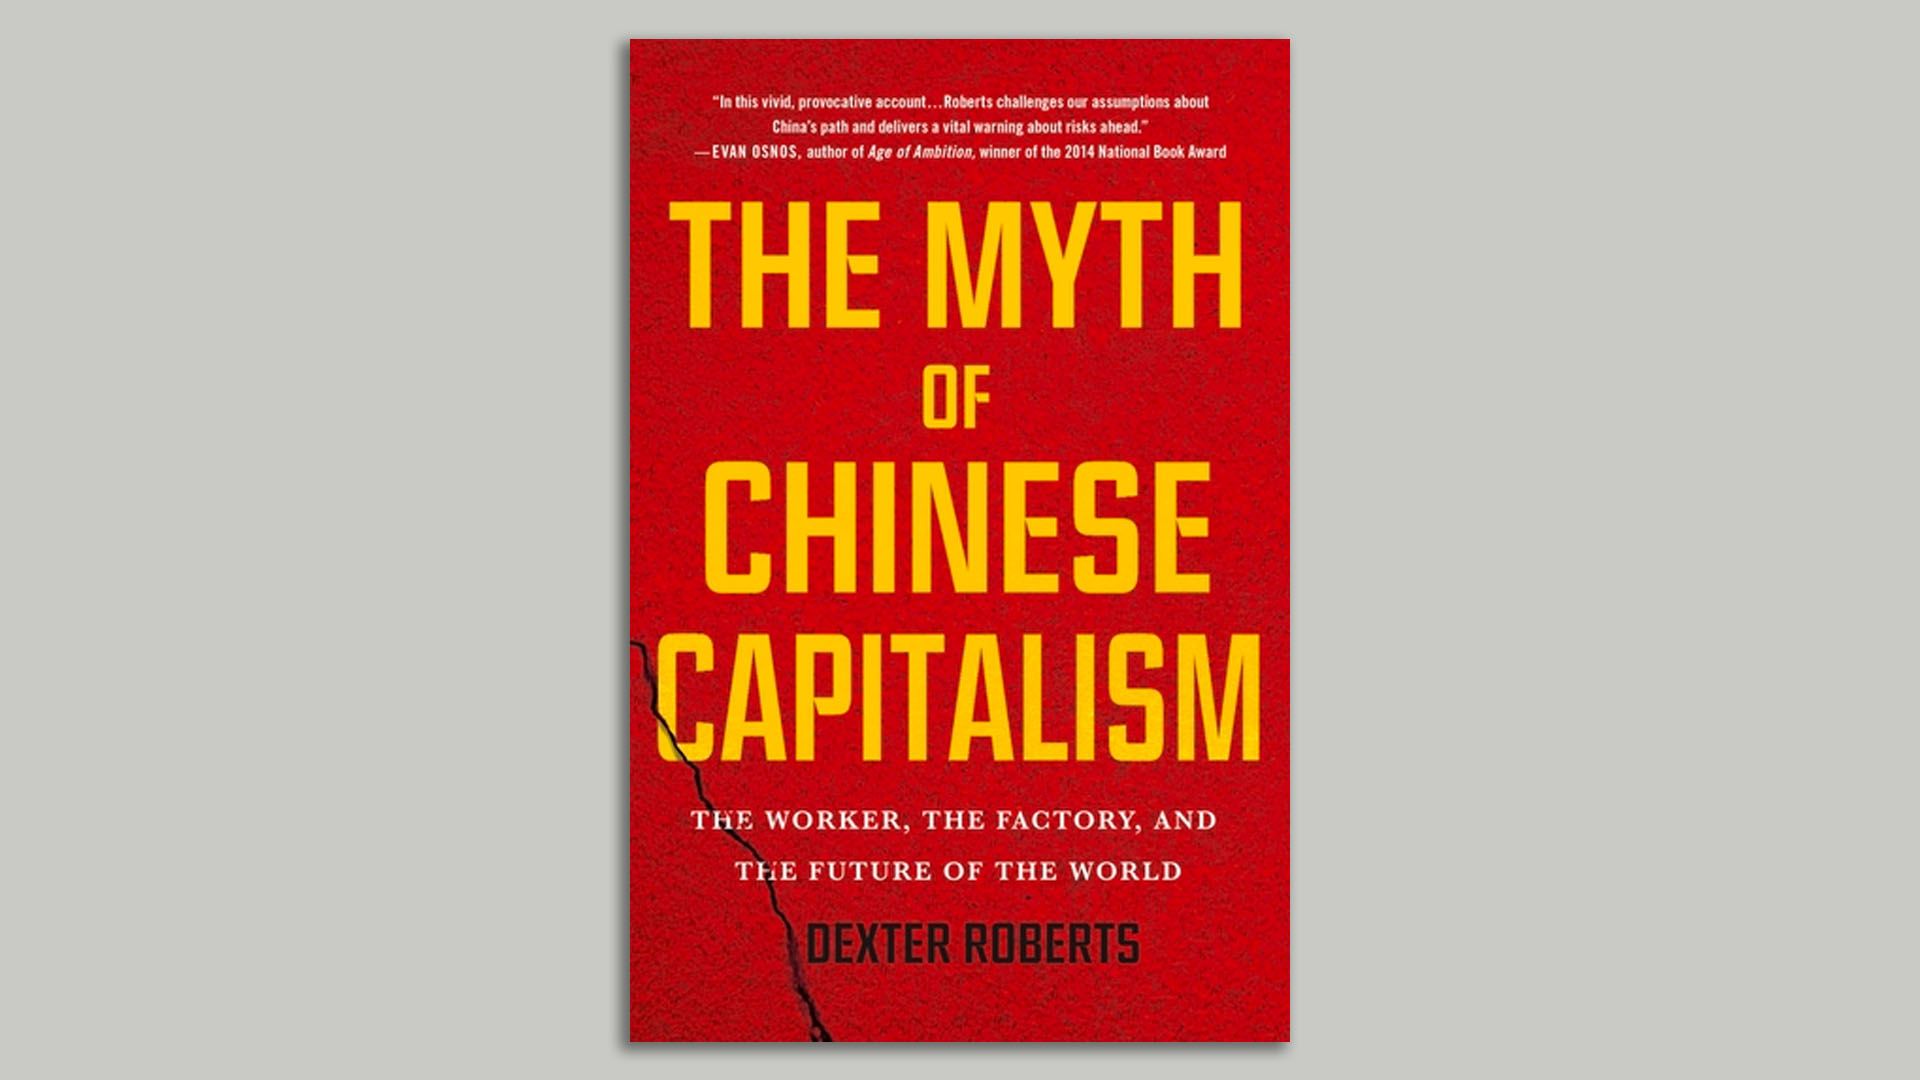 The front cover of the book "The Myth of Chinese Capitalism." Red background with yellow text.